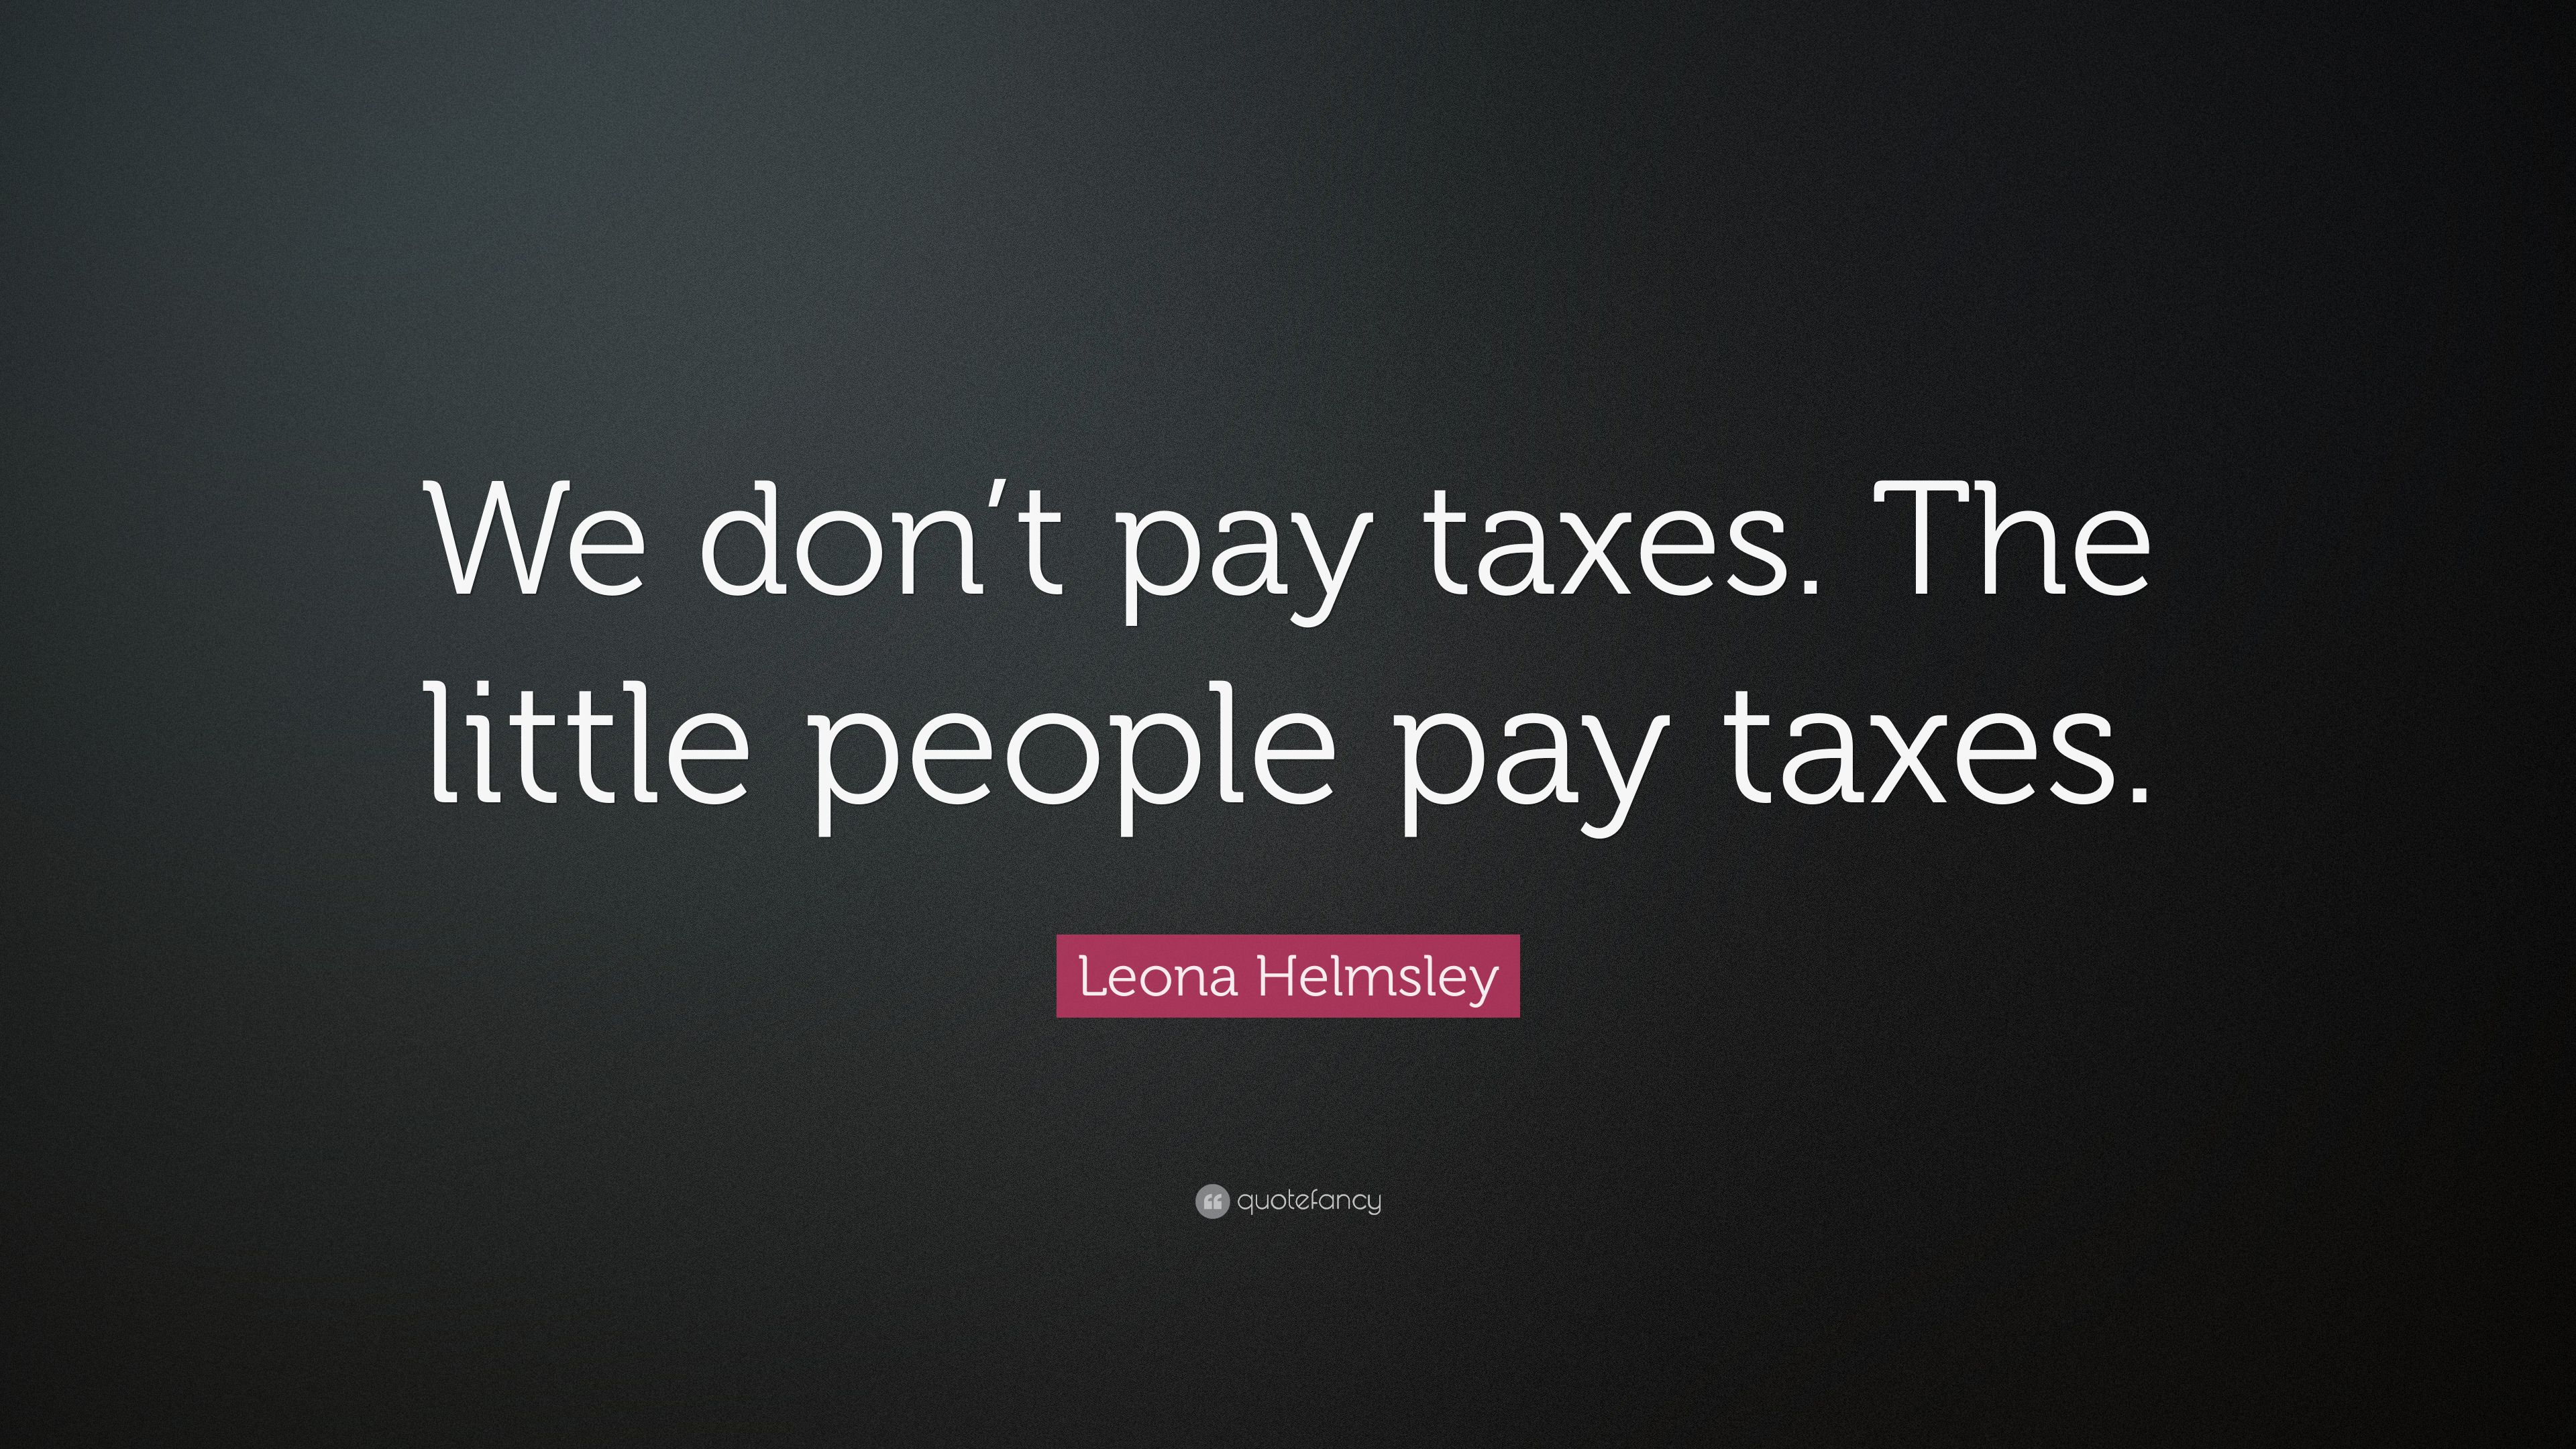 Leona Helmsley Quote: “We don't pay taxes. The little people pay taxes.” (7 wallpaper)